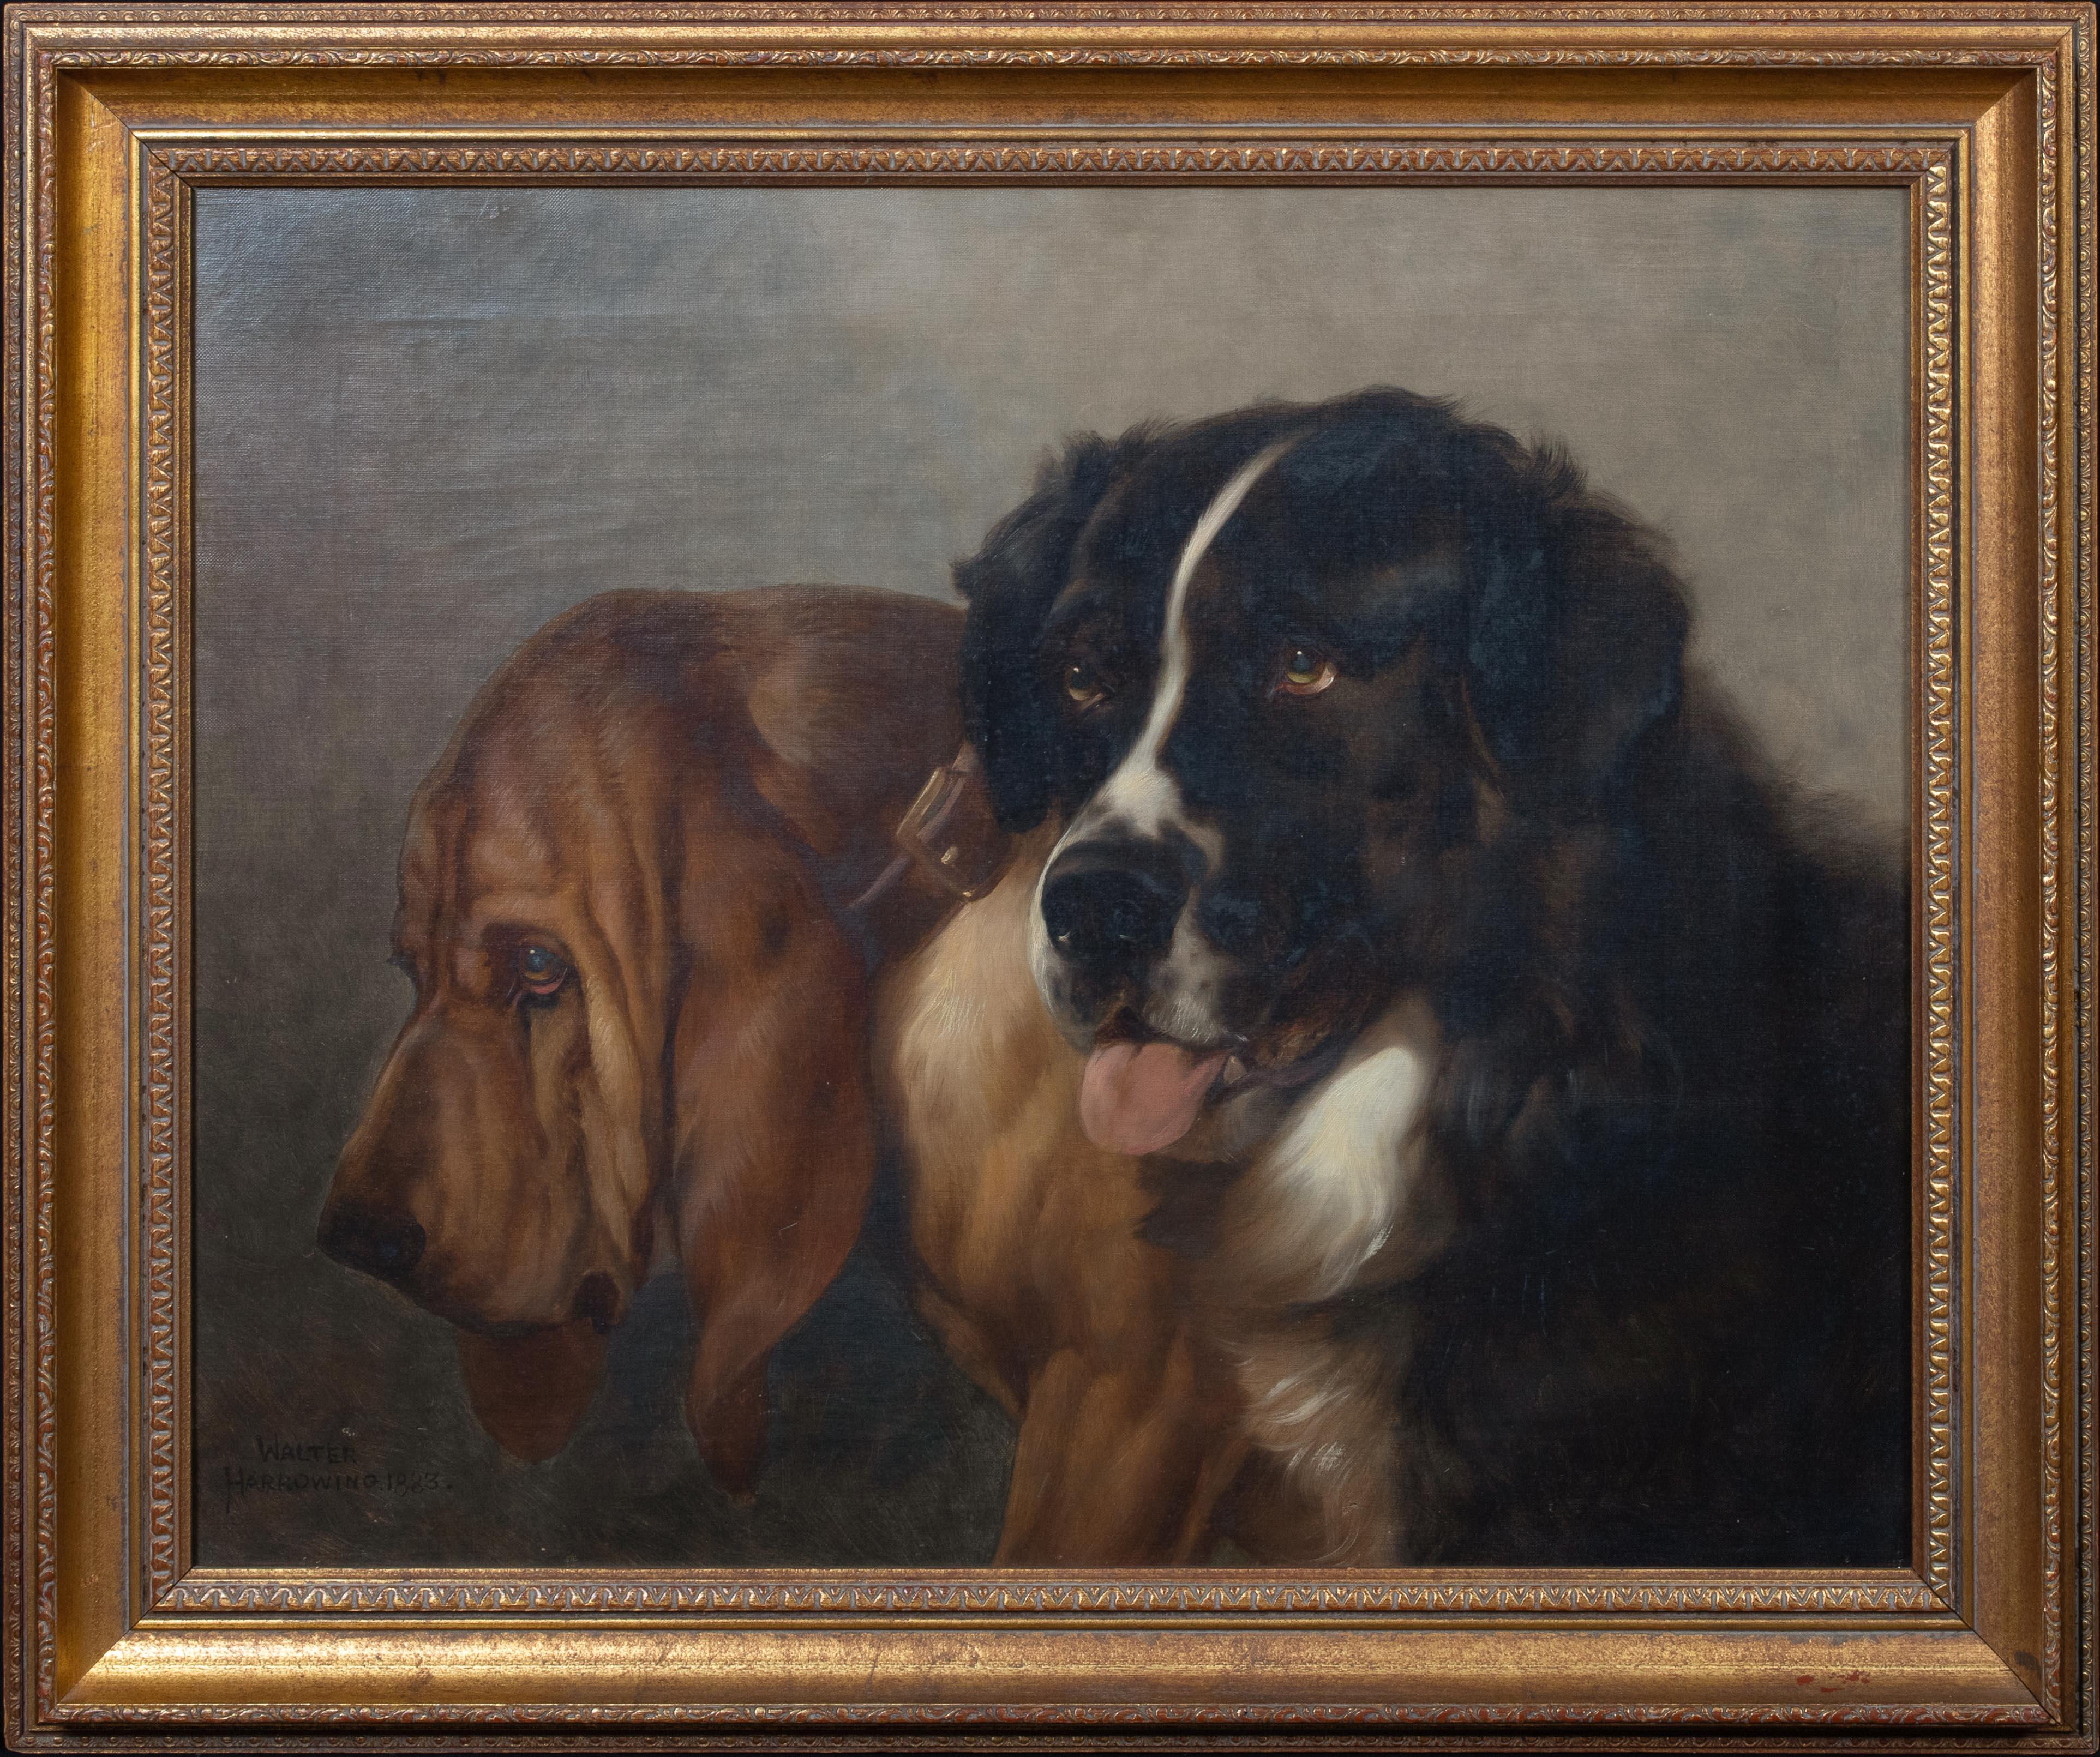 St Bernard & Bloodhound, 19th Century  by Walter Harrowing (1838-1913) - Painting by Unknown